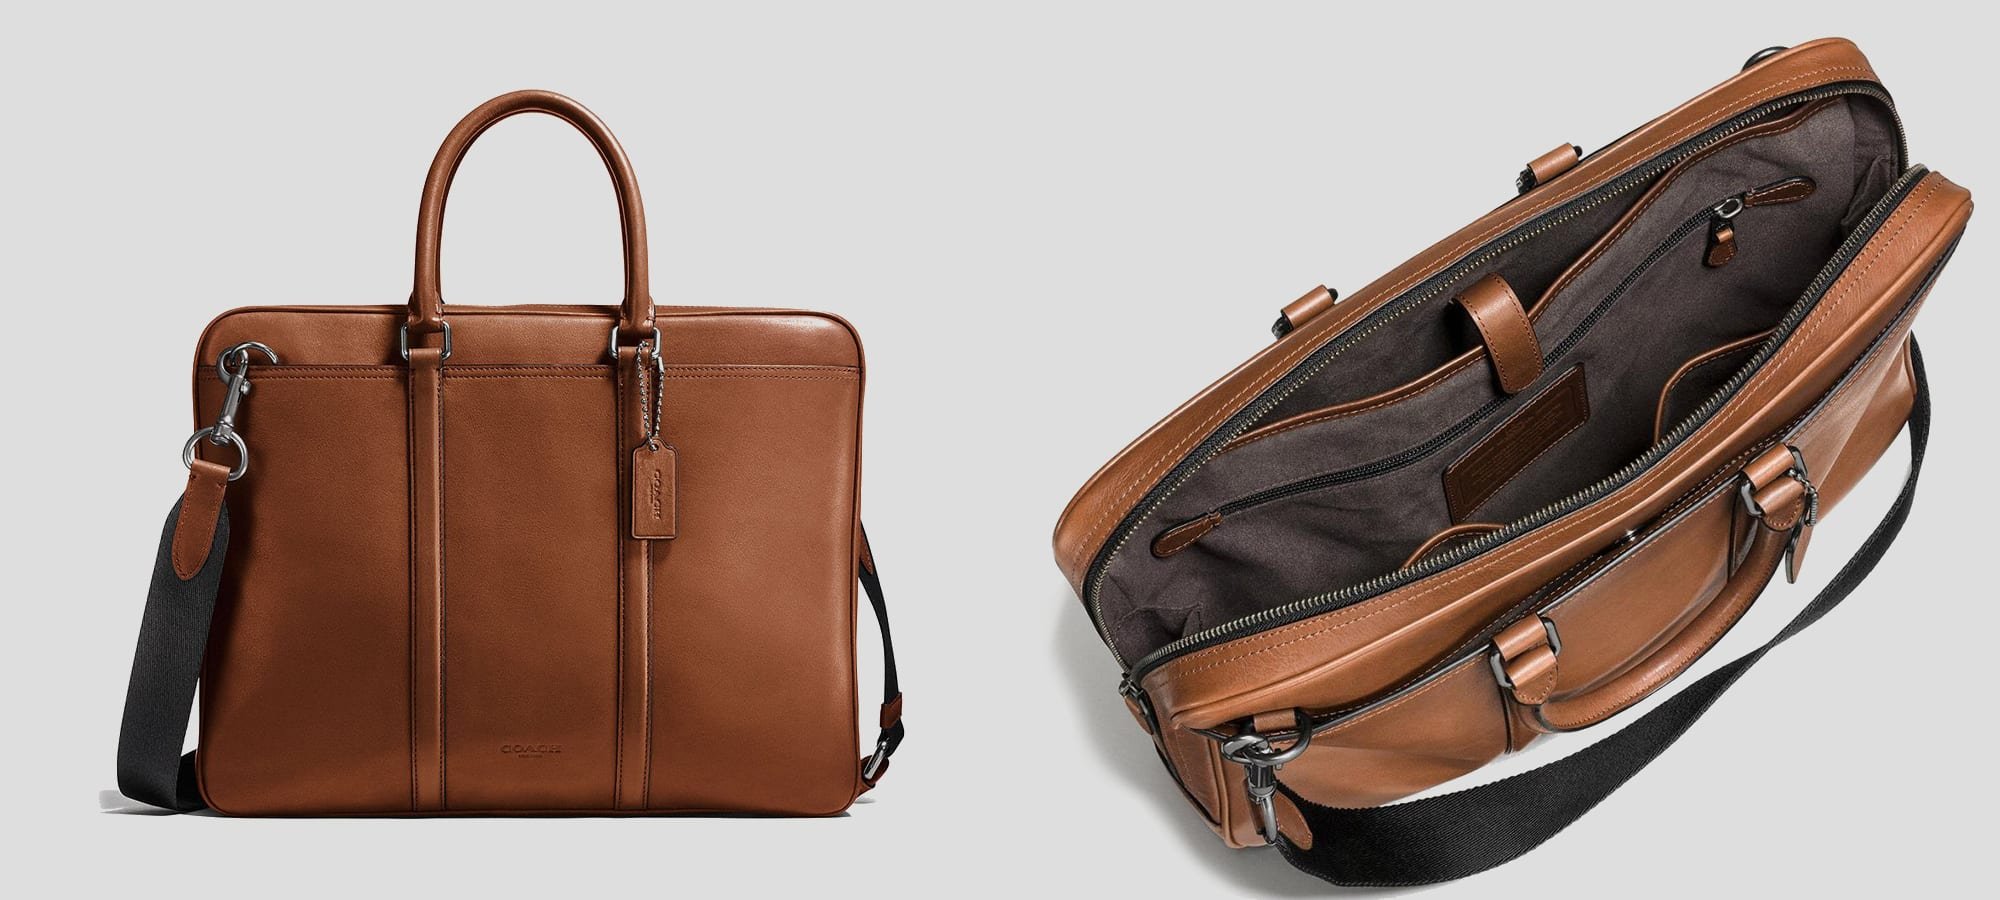 The best men's work bags to level up your office style